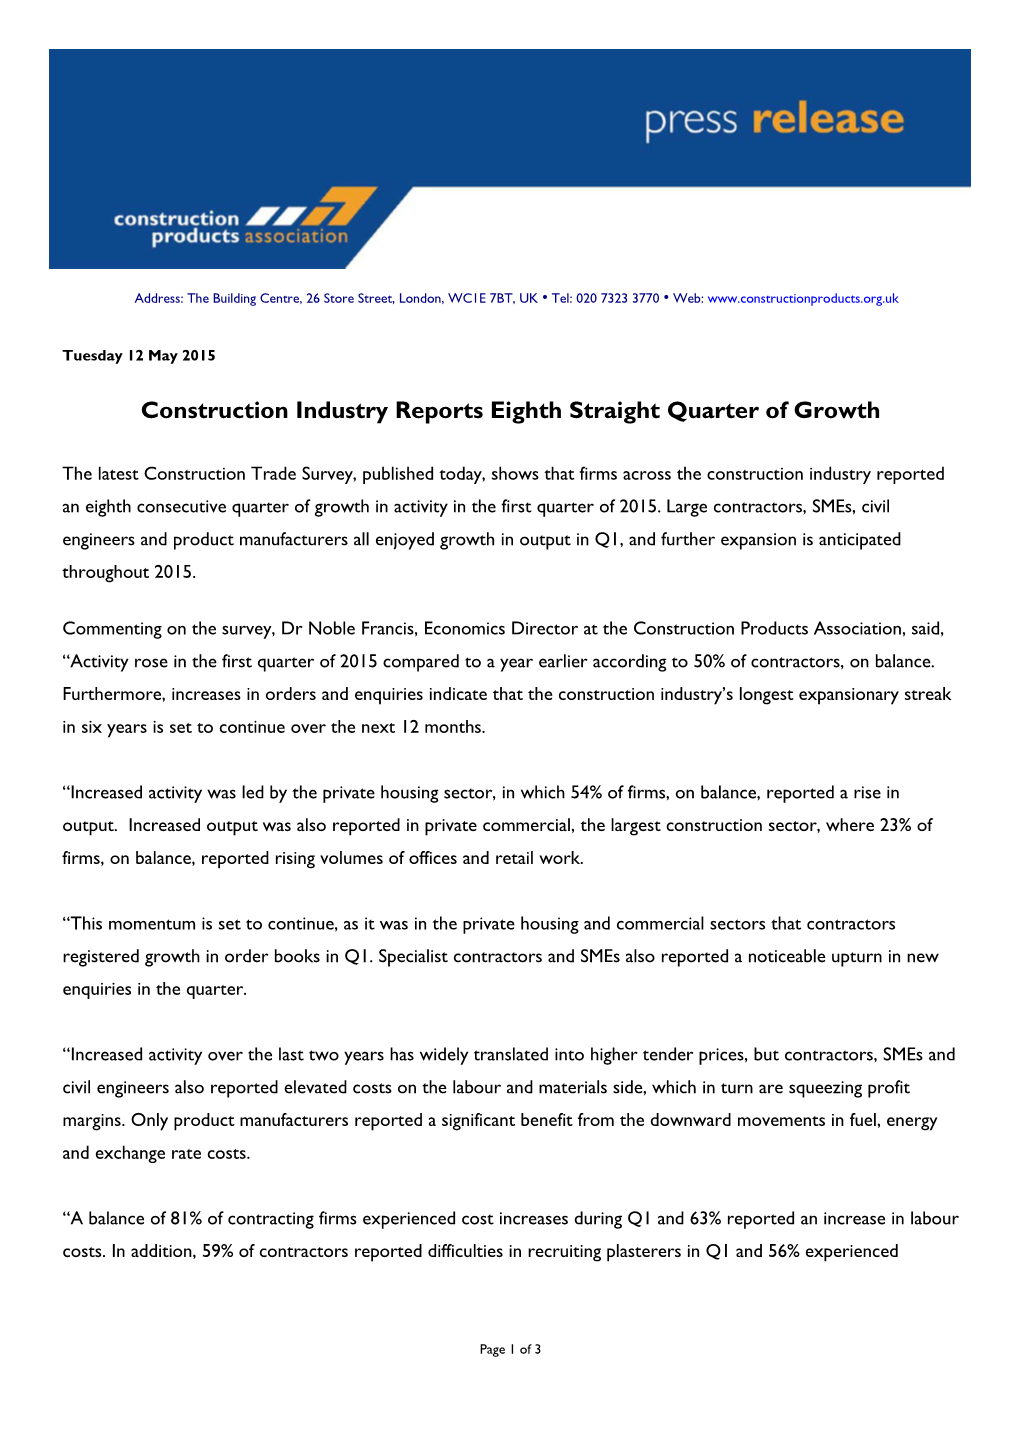 Construction Industry Reports Eighth Straight Quarter of Growth